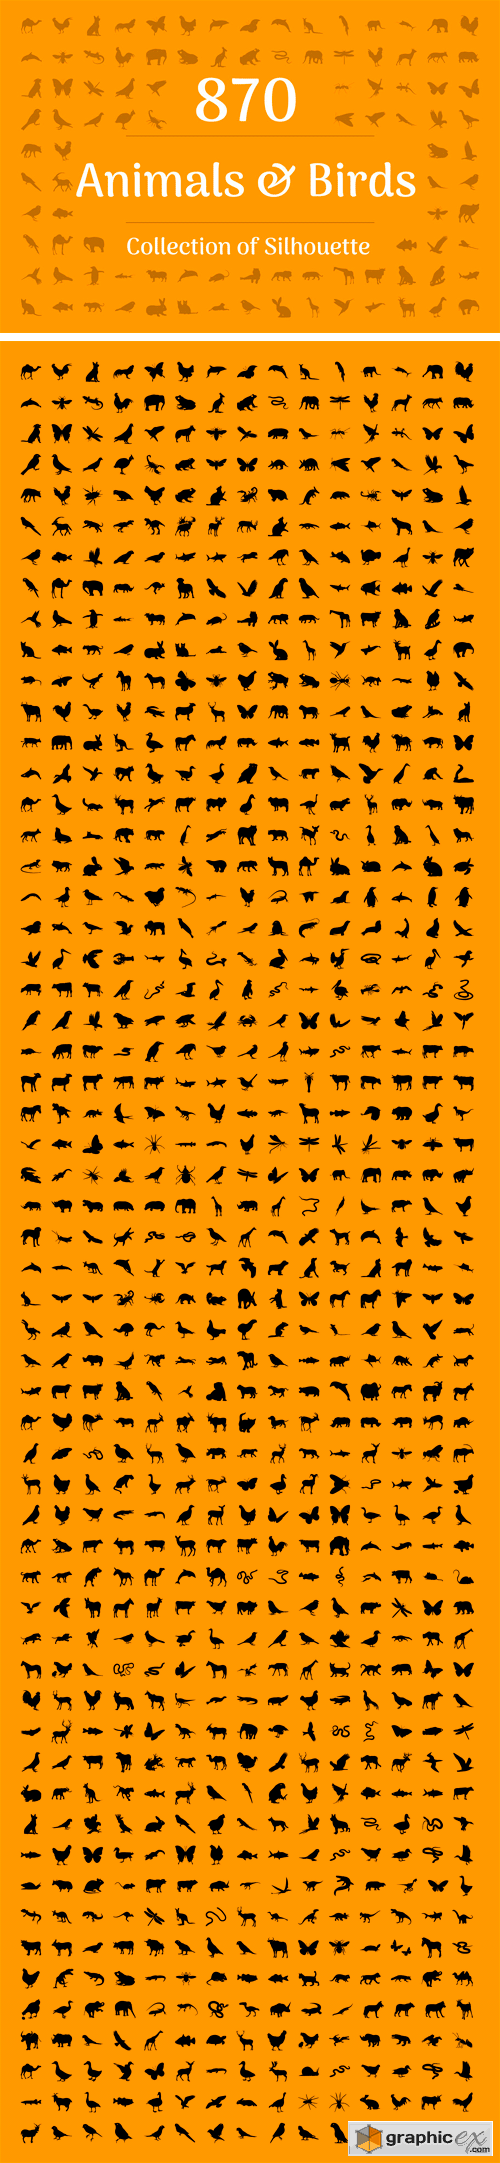 870 Animals and Birds Silhouette